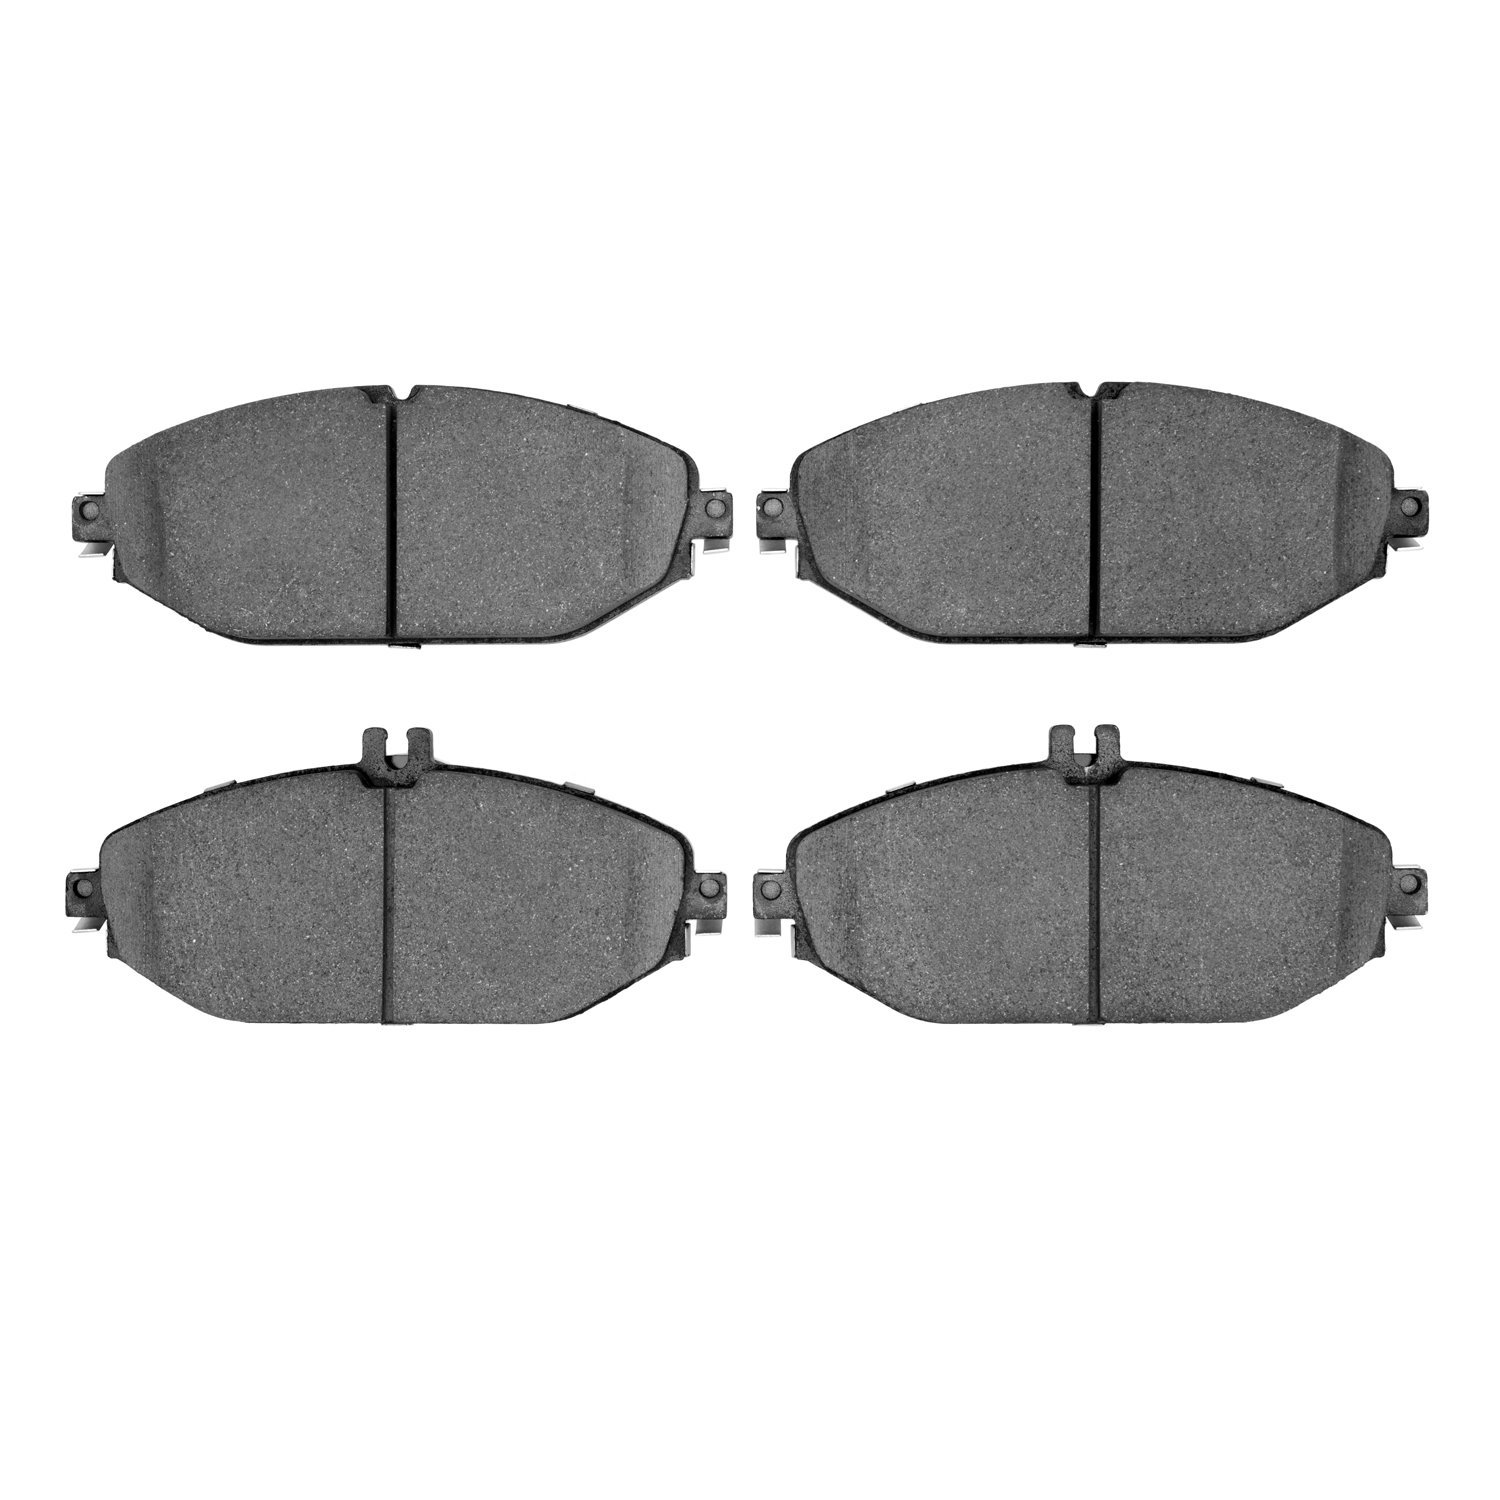 1551-1794-00 5000 Advanced Ceramic Brake Pads, Fits Select Mercedes-Benz, Position: Front